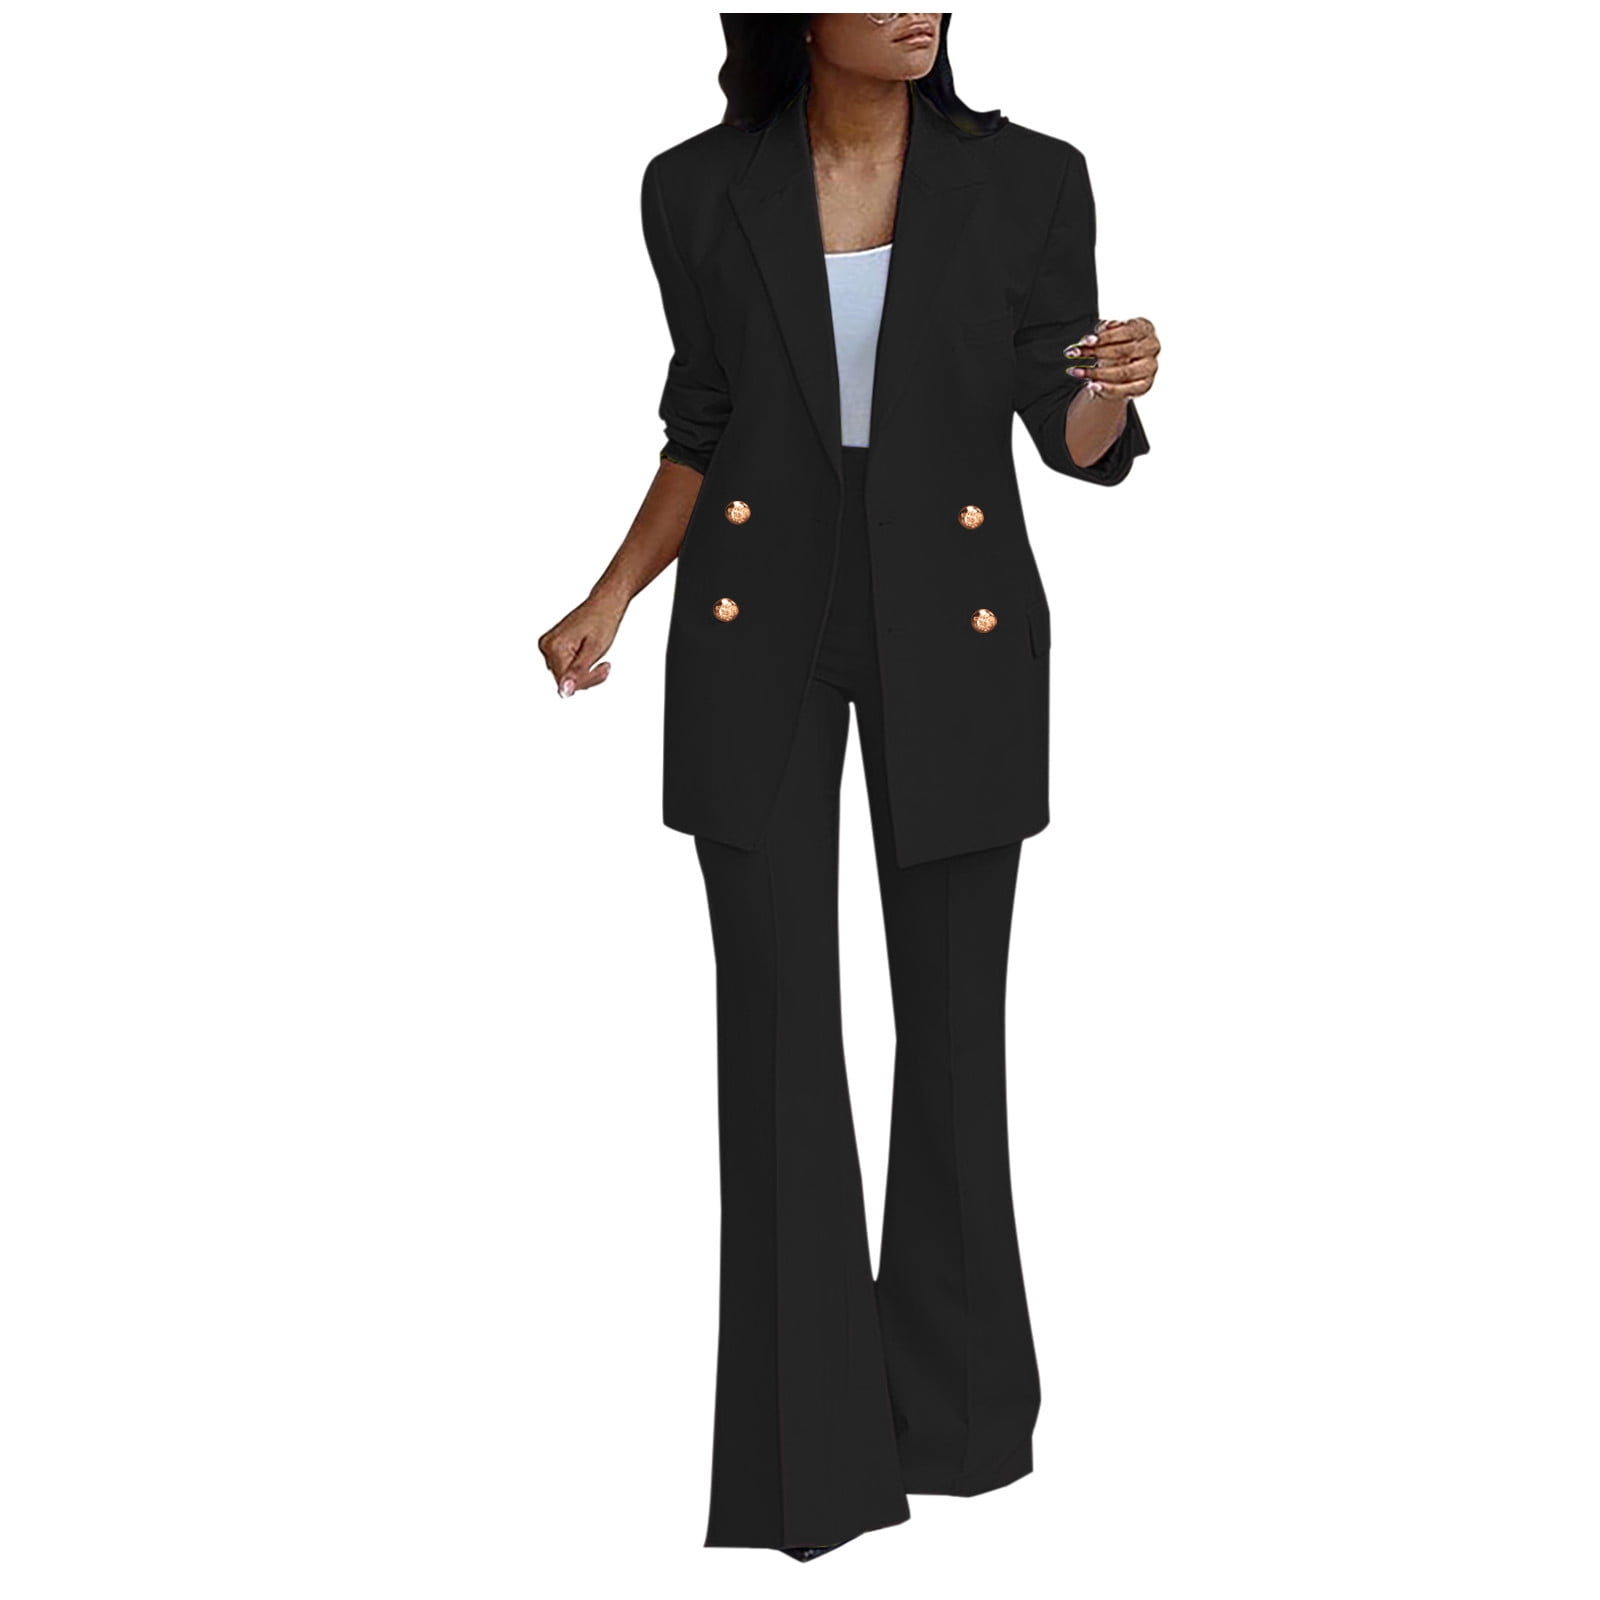 Womens Smart Formal Business Long Sleeve Jacket Full Length Trousers Suit  Ladies Tailored Finish Soft Lined Office 2 Piece Black 1020 12   Amazoncouk Fashion